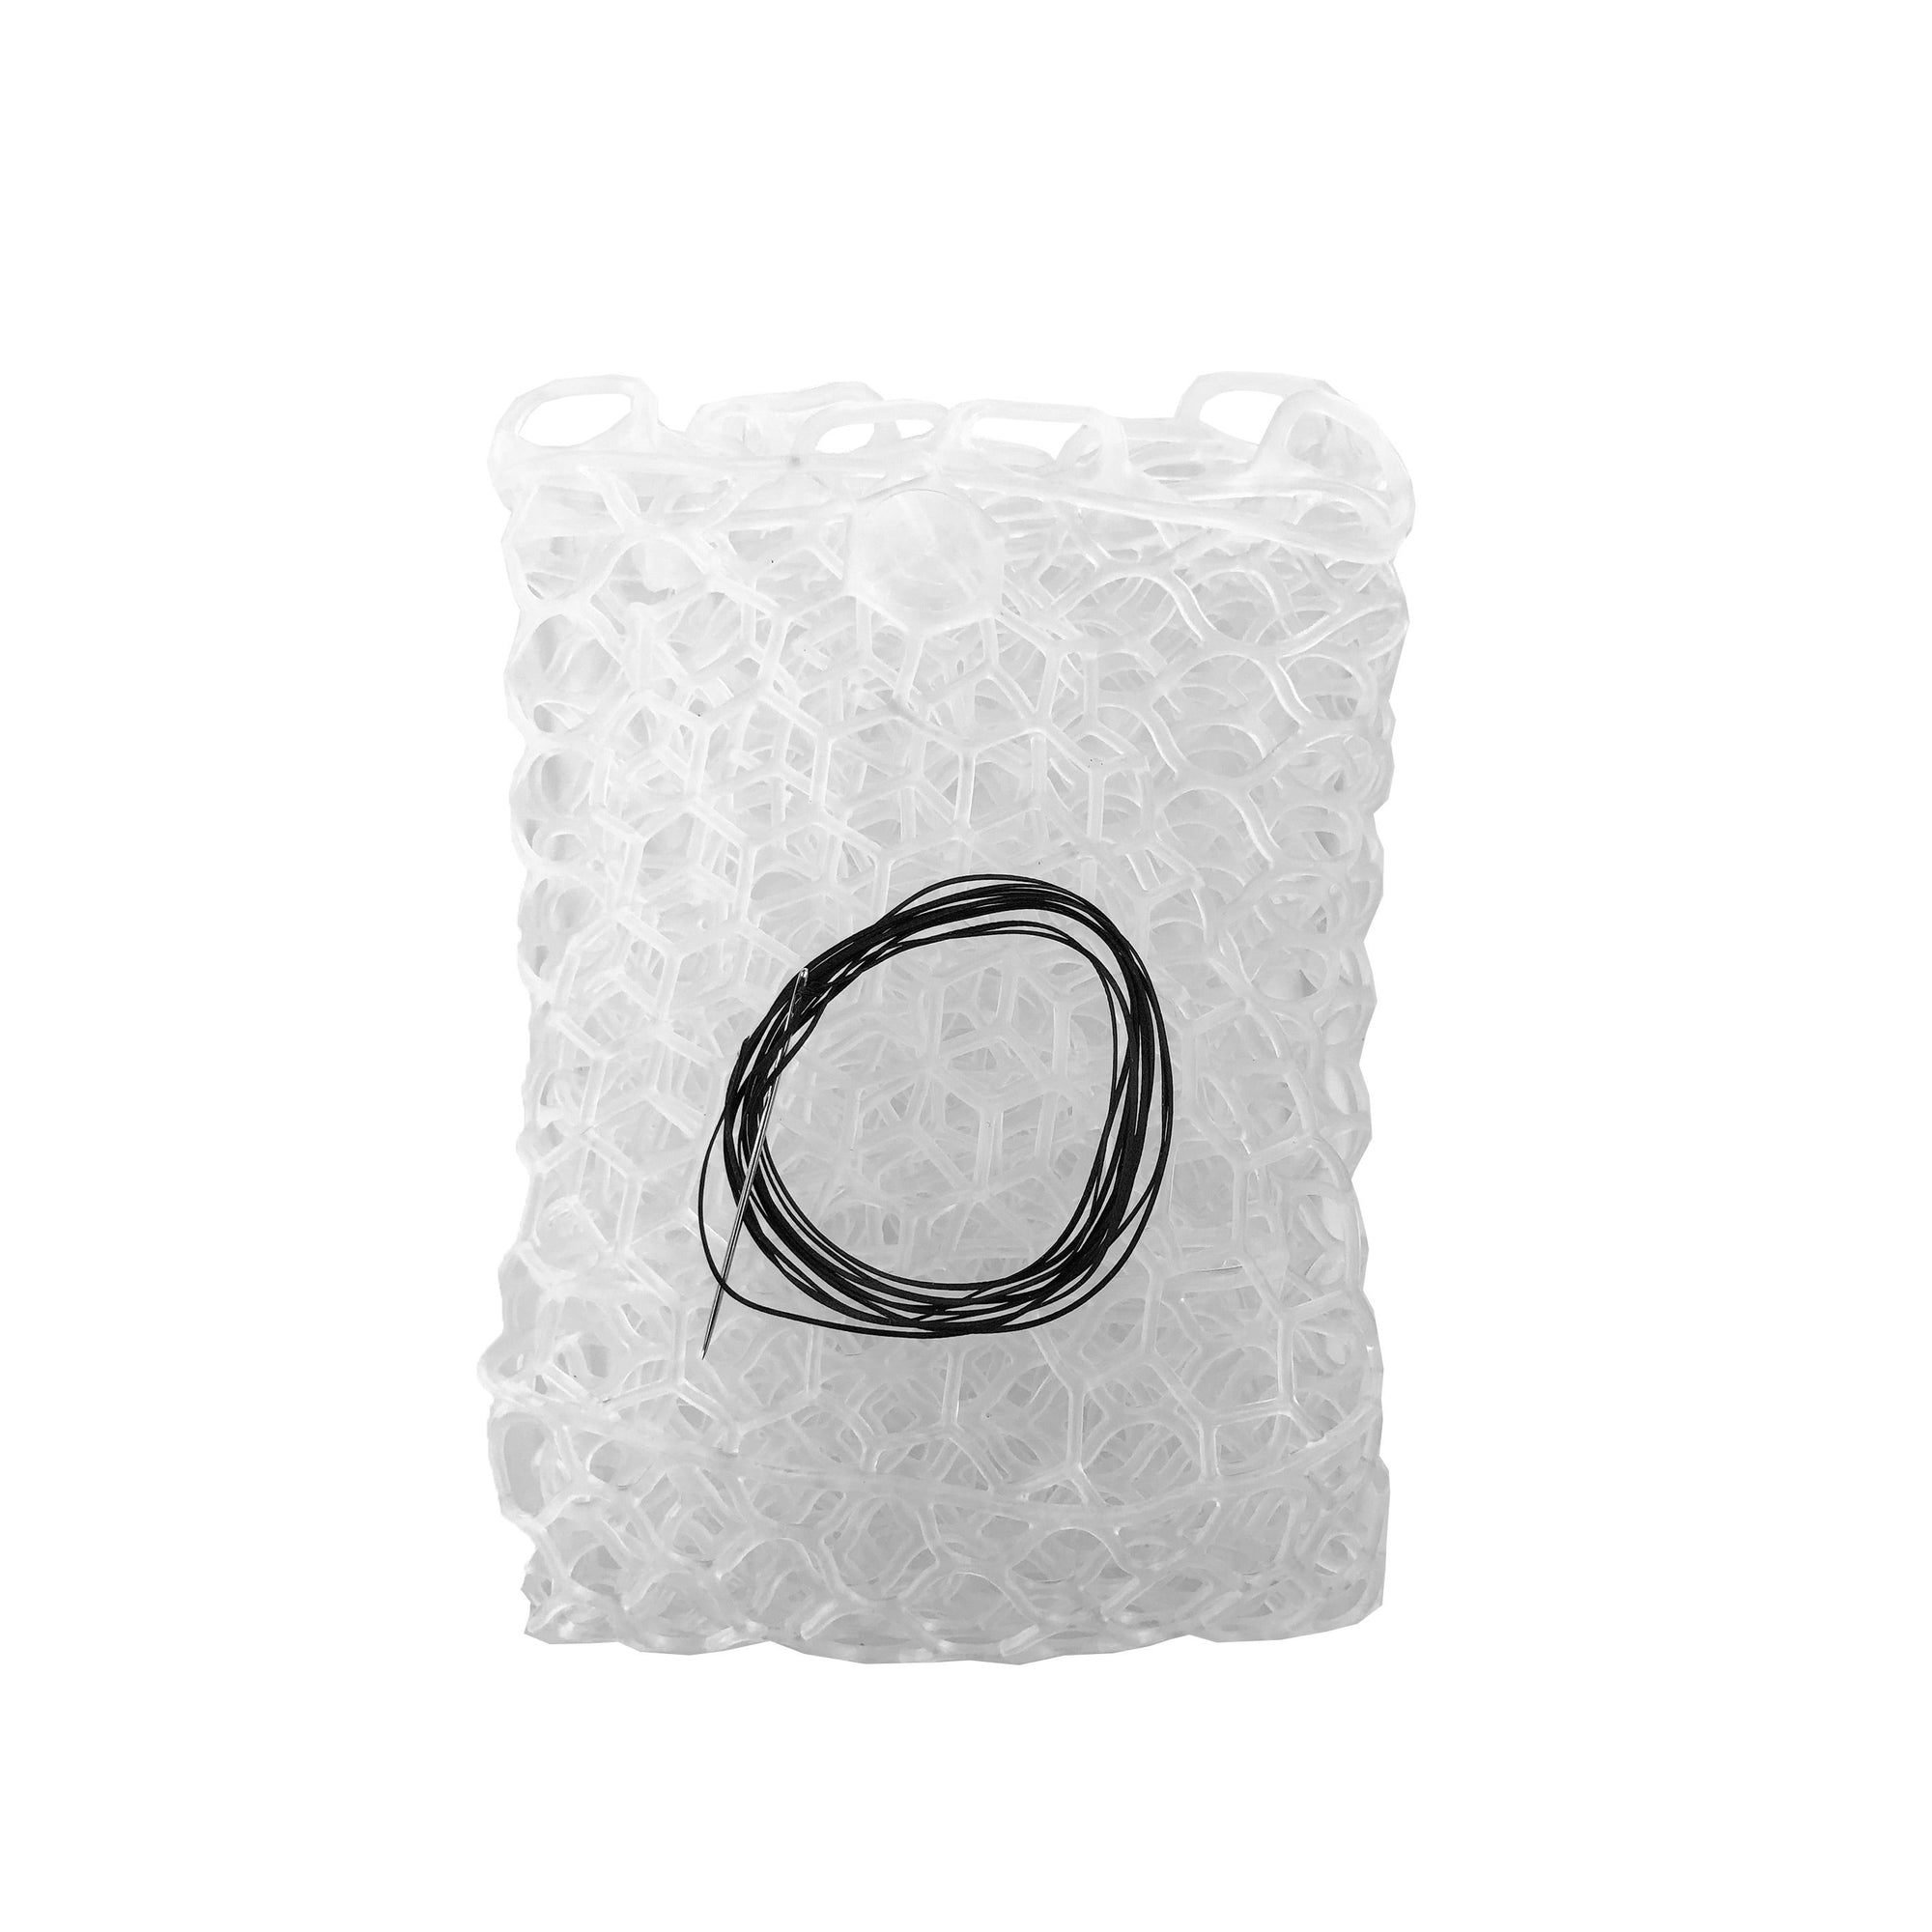 Fishpond 15" Small Clear - Nomad Replacement Net | [Hand, Emerger, Mid-Length, Guide Nets]